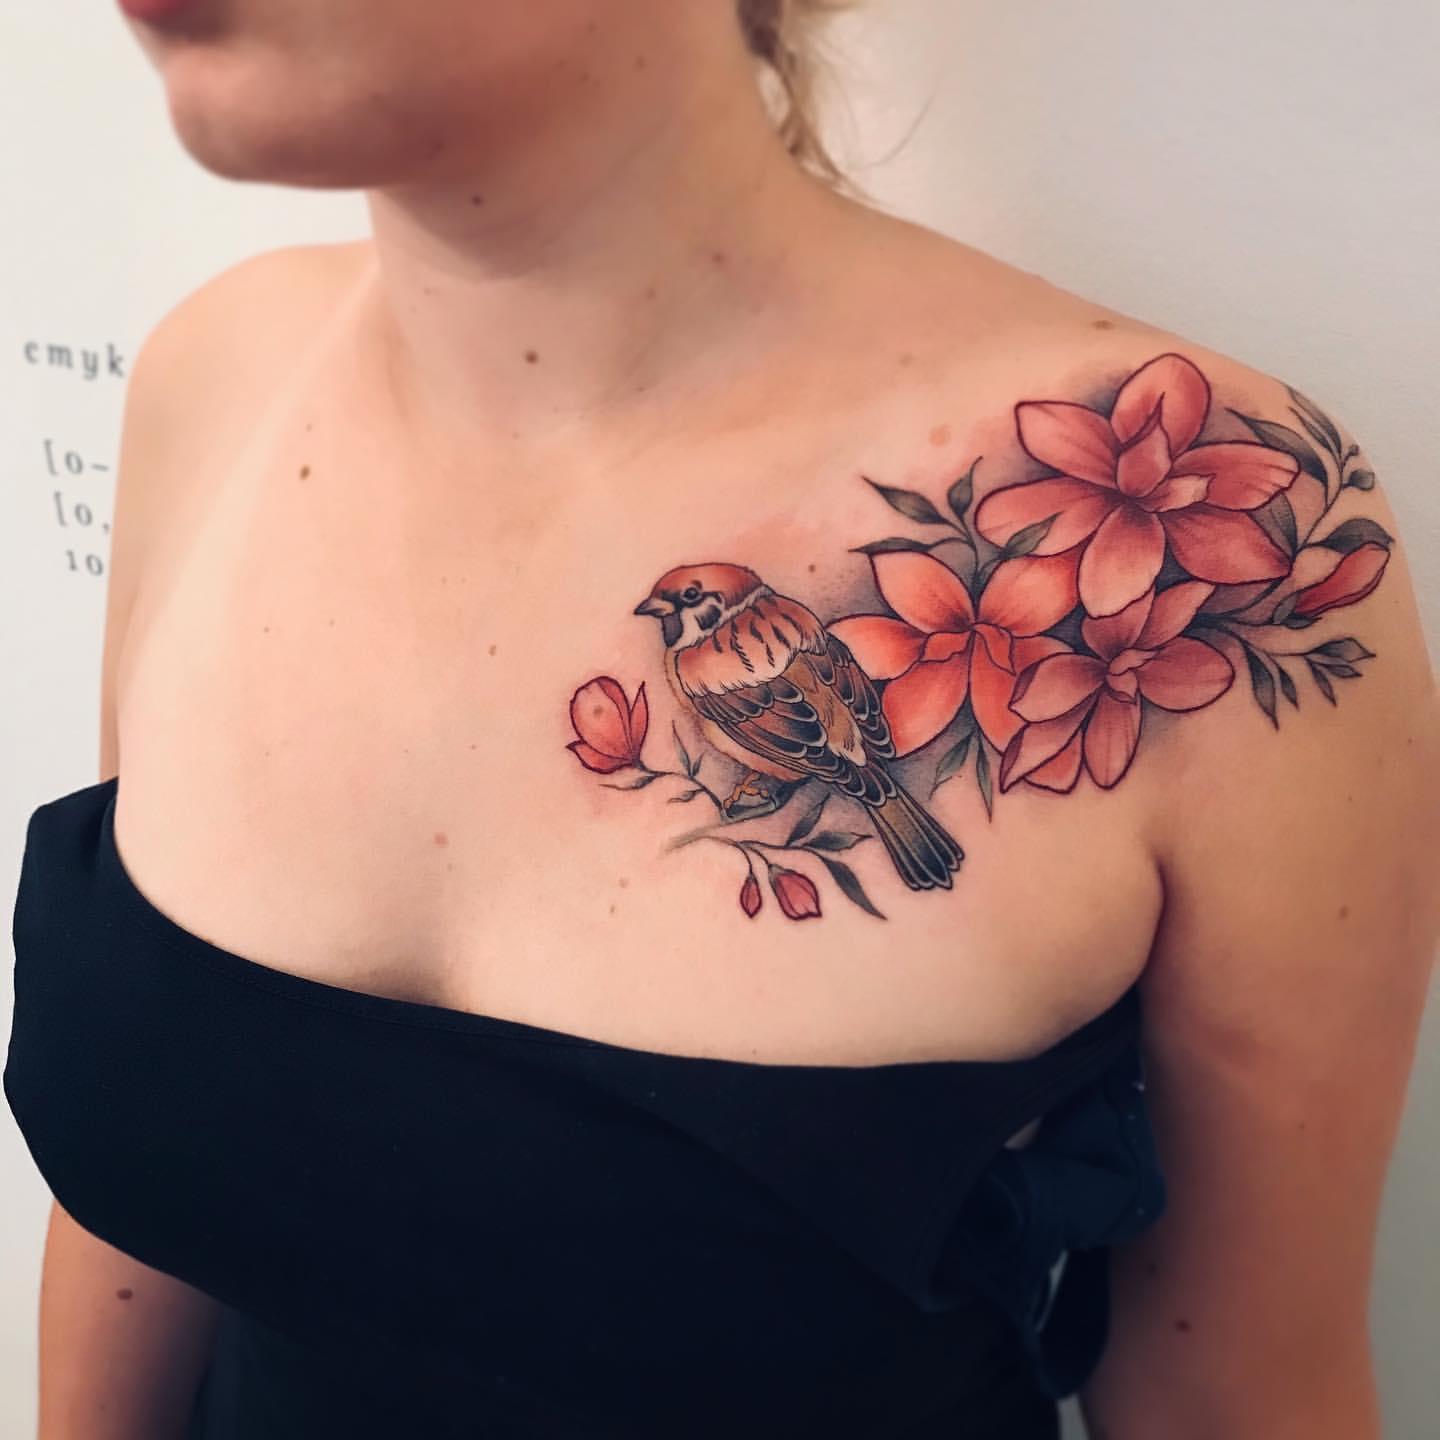 40+ Sparrow Tattoo Ideas to Help You Take Flight in 2023